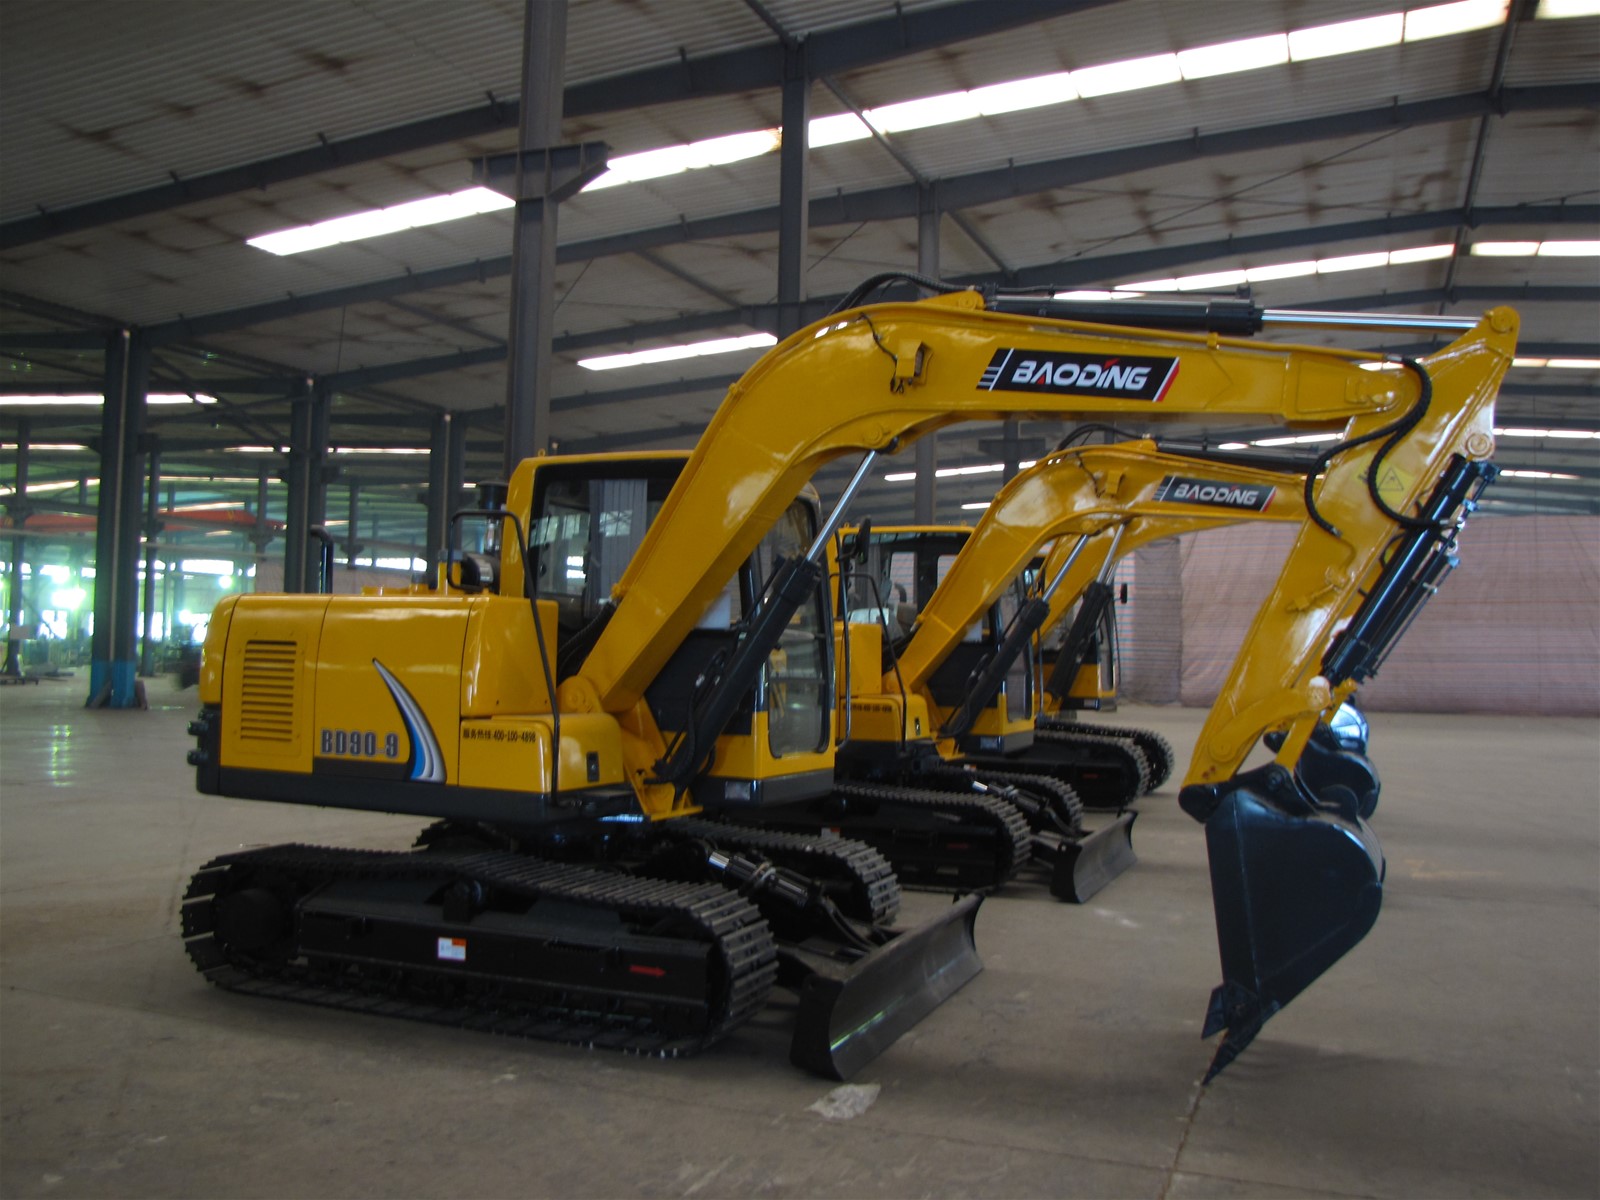 Cheap new small wheel excavator BD80 for sale